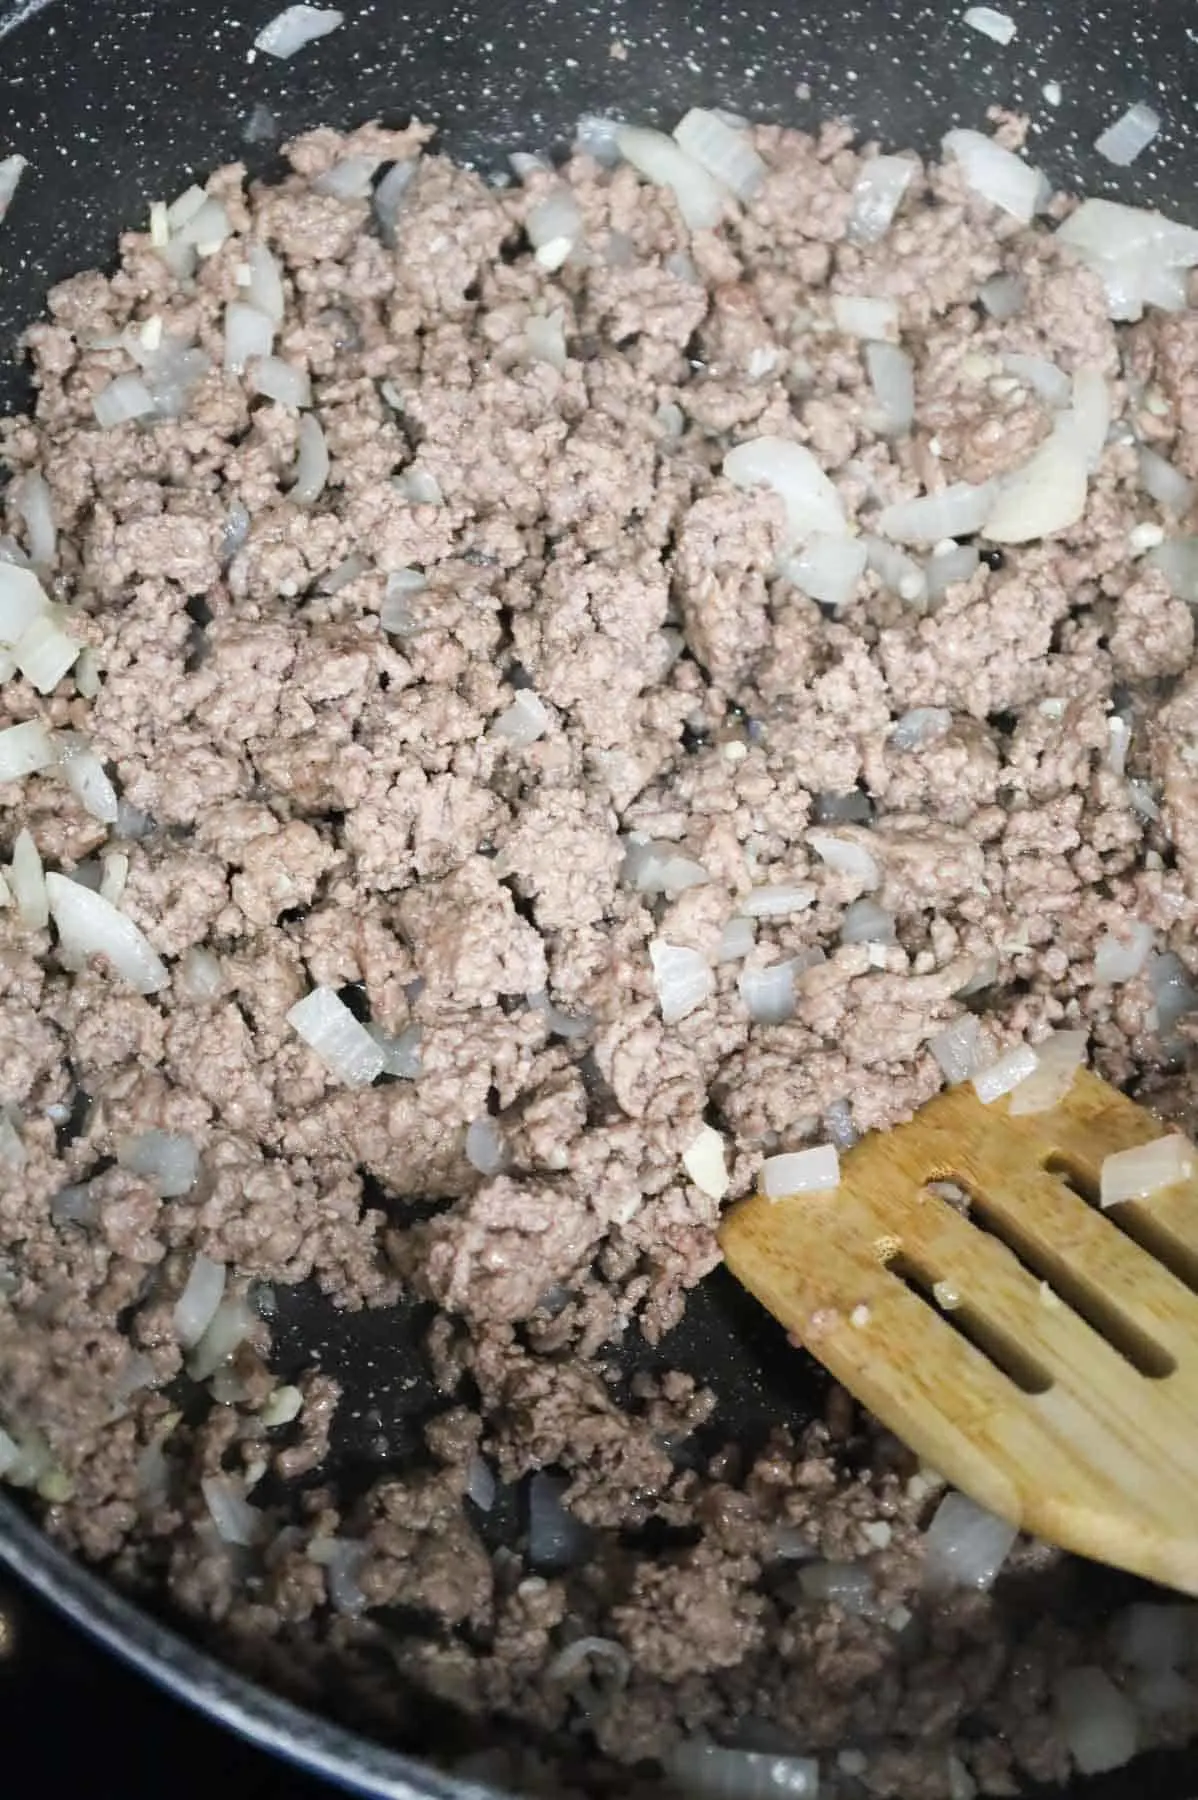 minced garlic being stirred into cooked ground beef and onions in a skillet